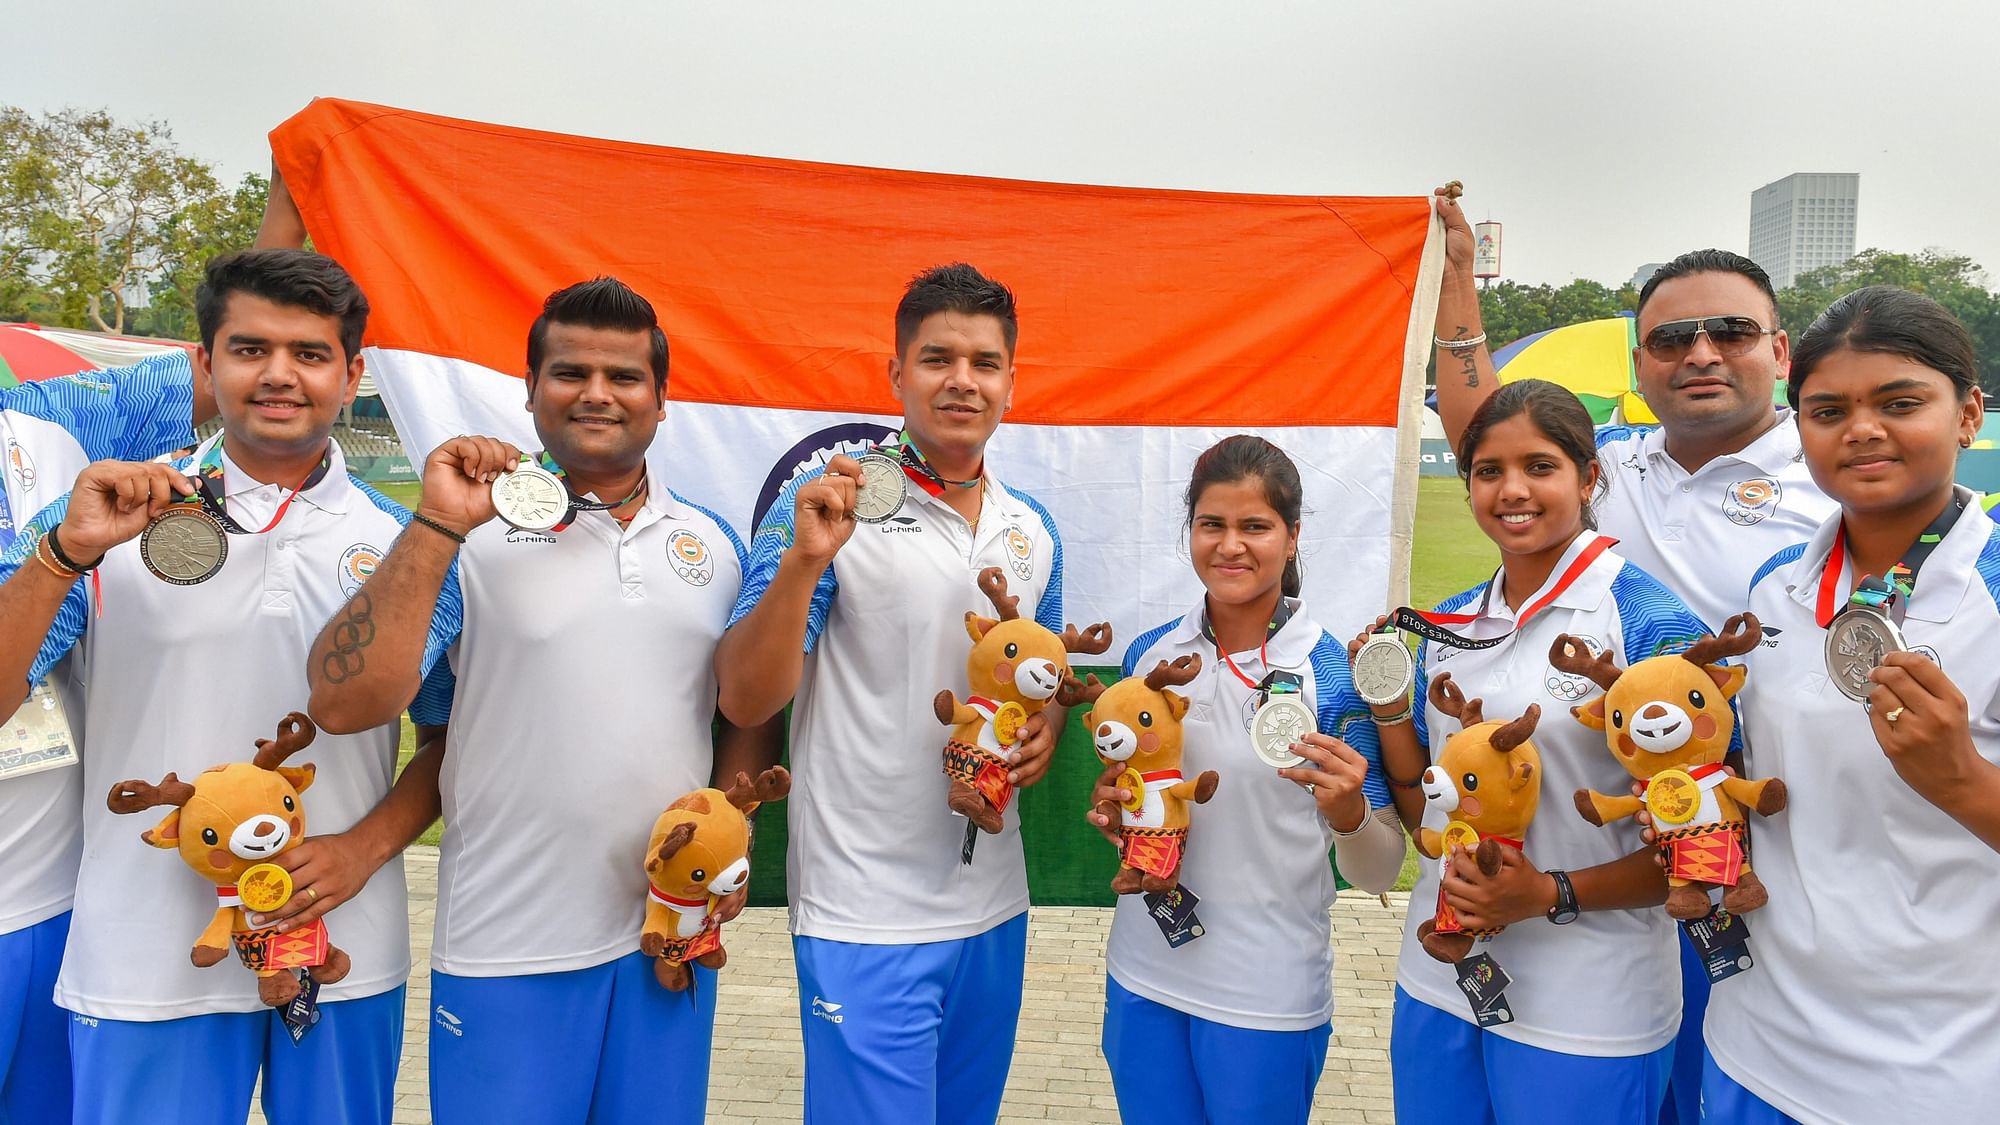 The Indian Men’s Compound Archery team  and the Indian Women’s Compound Archery team after the medal ceremony